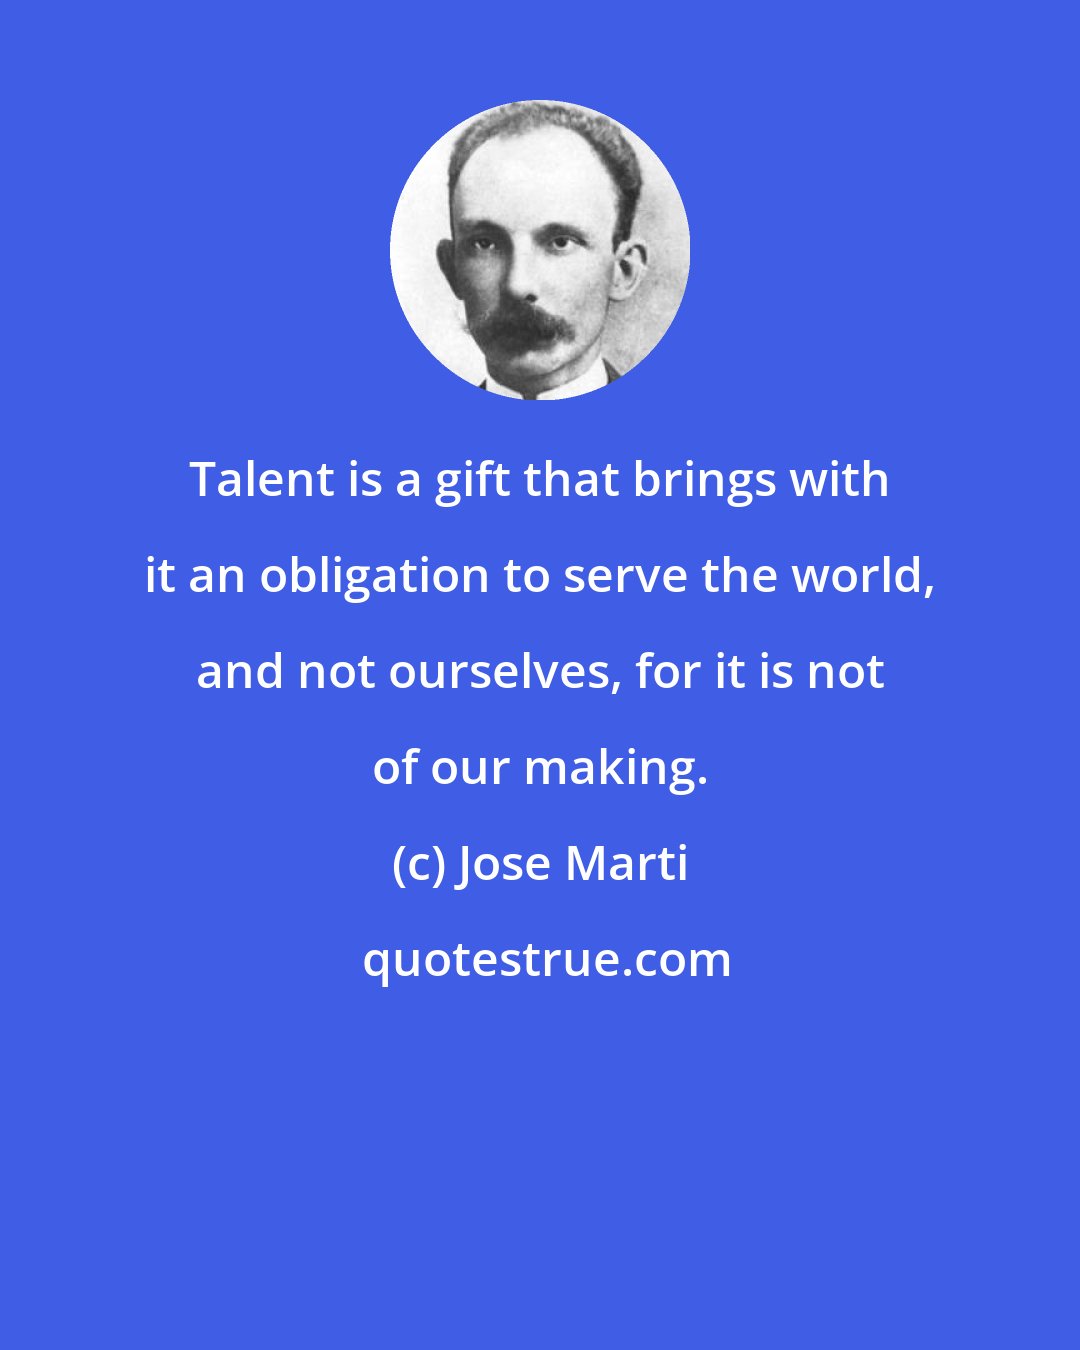 Jose Marti: Talent is a gift that brings with it an obligation to serve the world, and not ourselves, for it is not of our making.